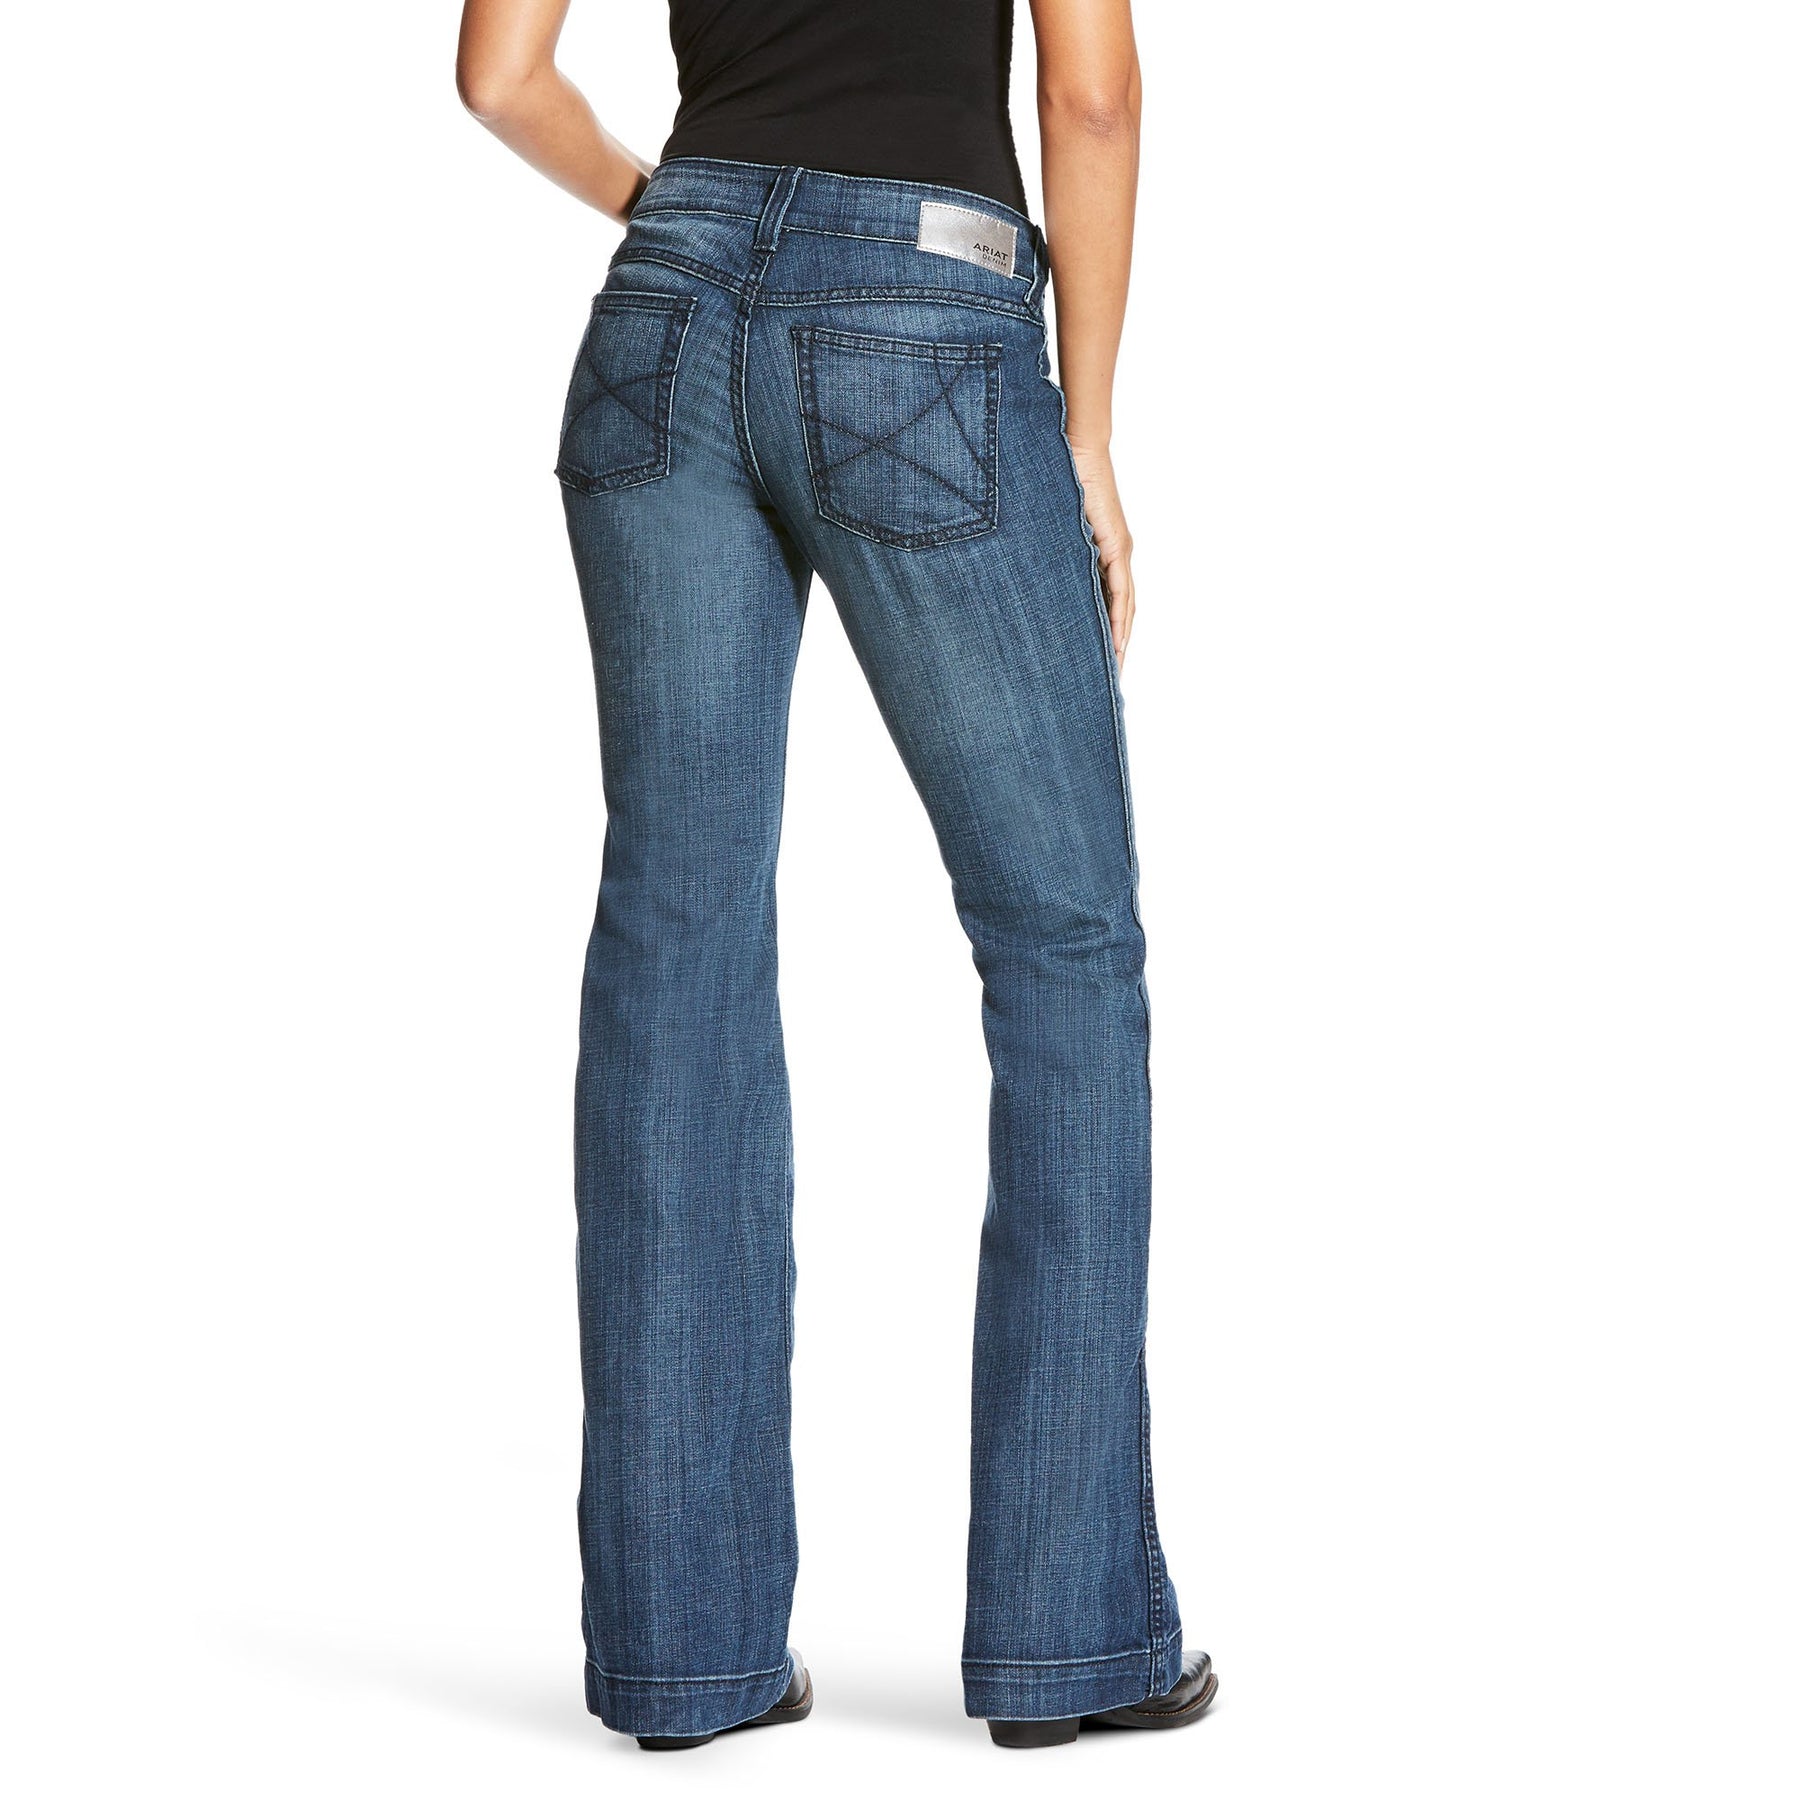 trouser jeans outfit western cinch jeans ariat cruisers  Trouser jeans  outfit Trouser jeans outfit western Trouser jeans